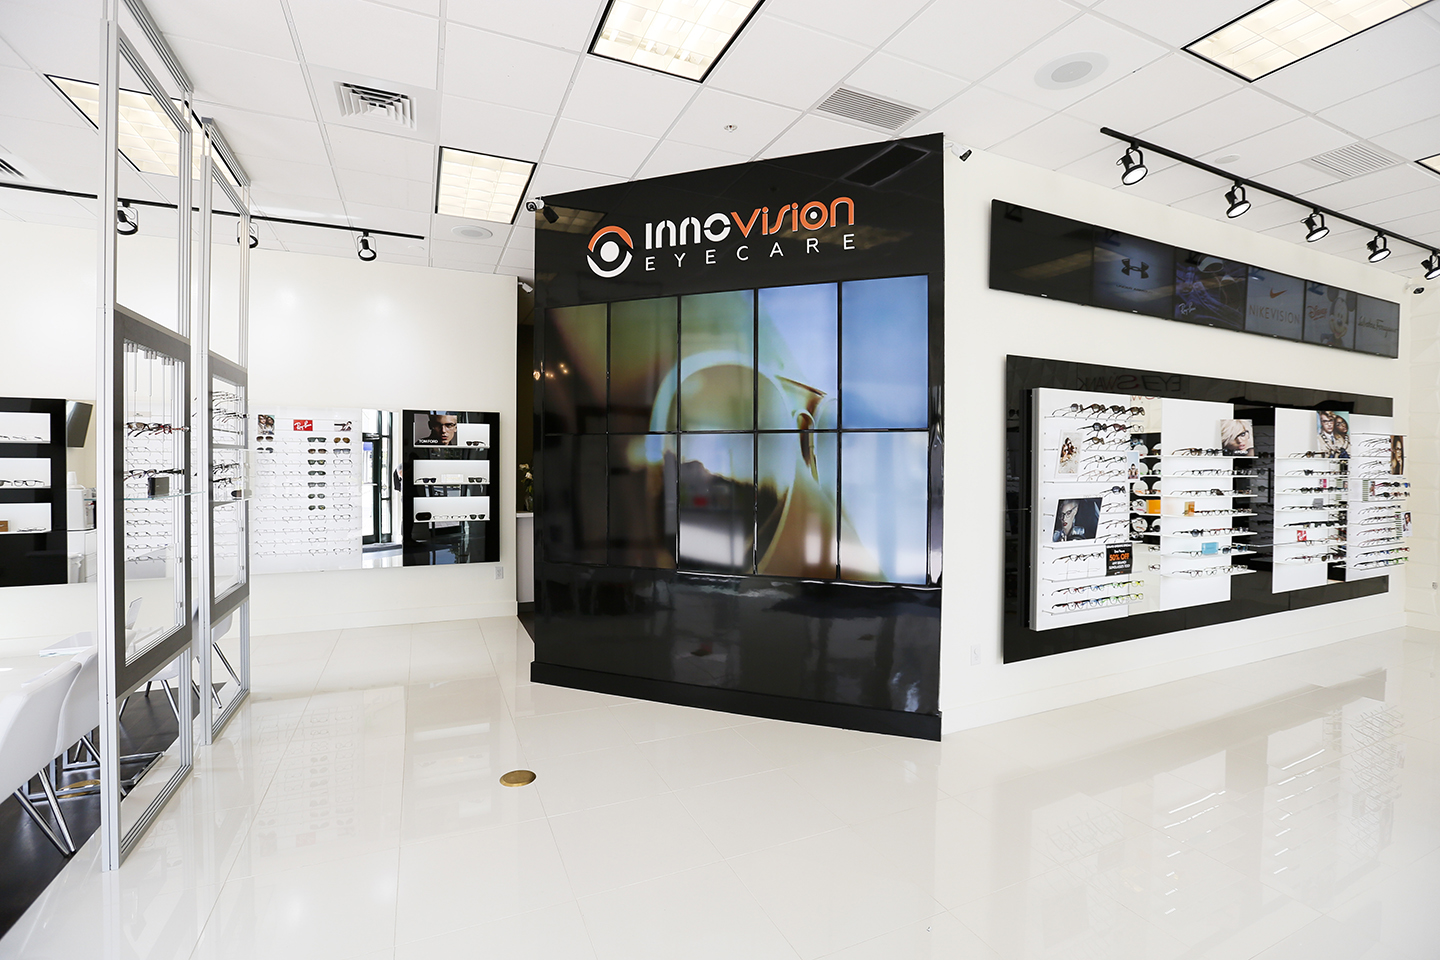 InnoVision Eye Care – Baltimore Maryland Eye Doctors, Vision Insurance,  Great Deals on Eyeglasses, Sunglasses, Contact Lenses – Online Scheduling –  Innovation – A REVOLUTIONARY EXPERIENCE IN EYE CARE